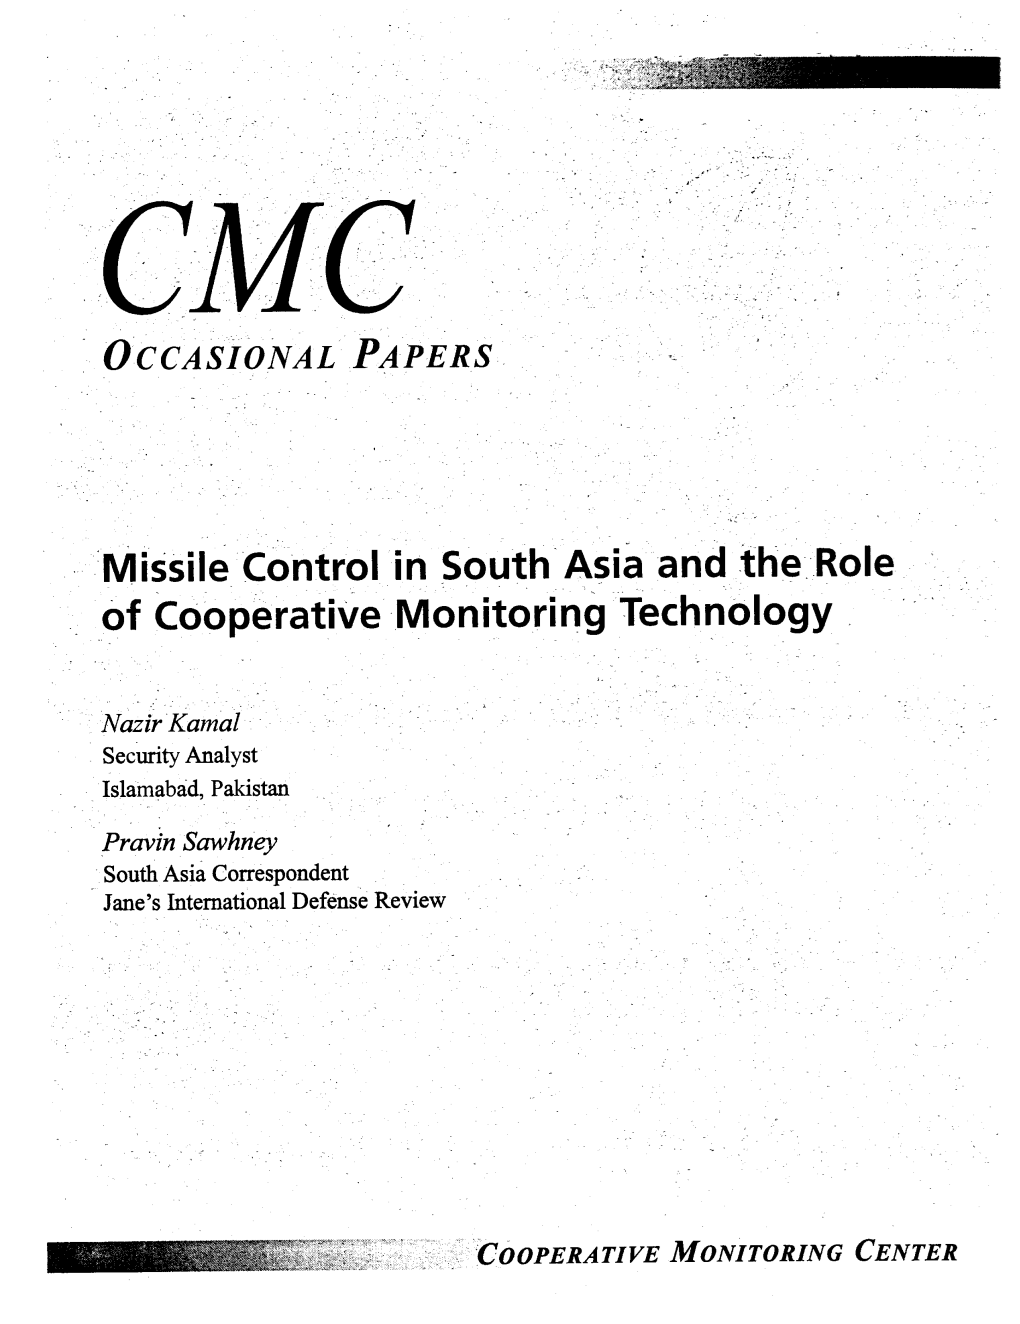 Missile Control in South Asia and the Role of Cooperative Monitoring Technology